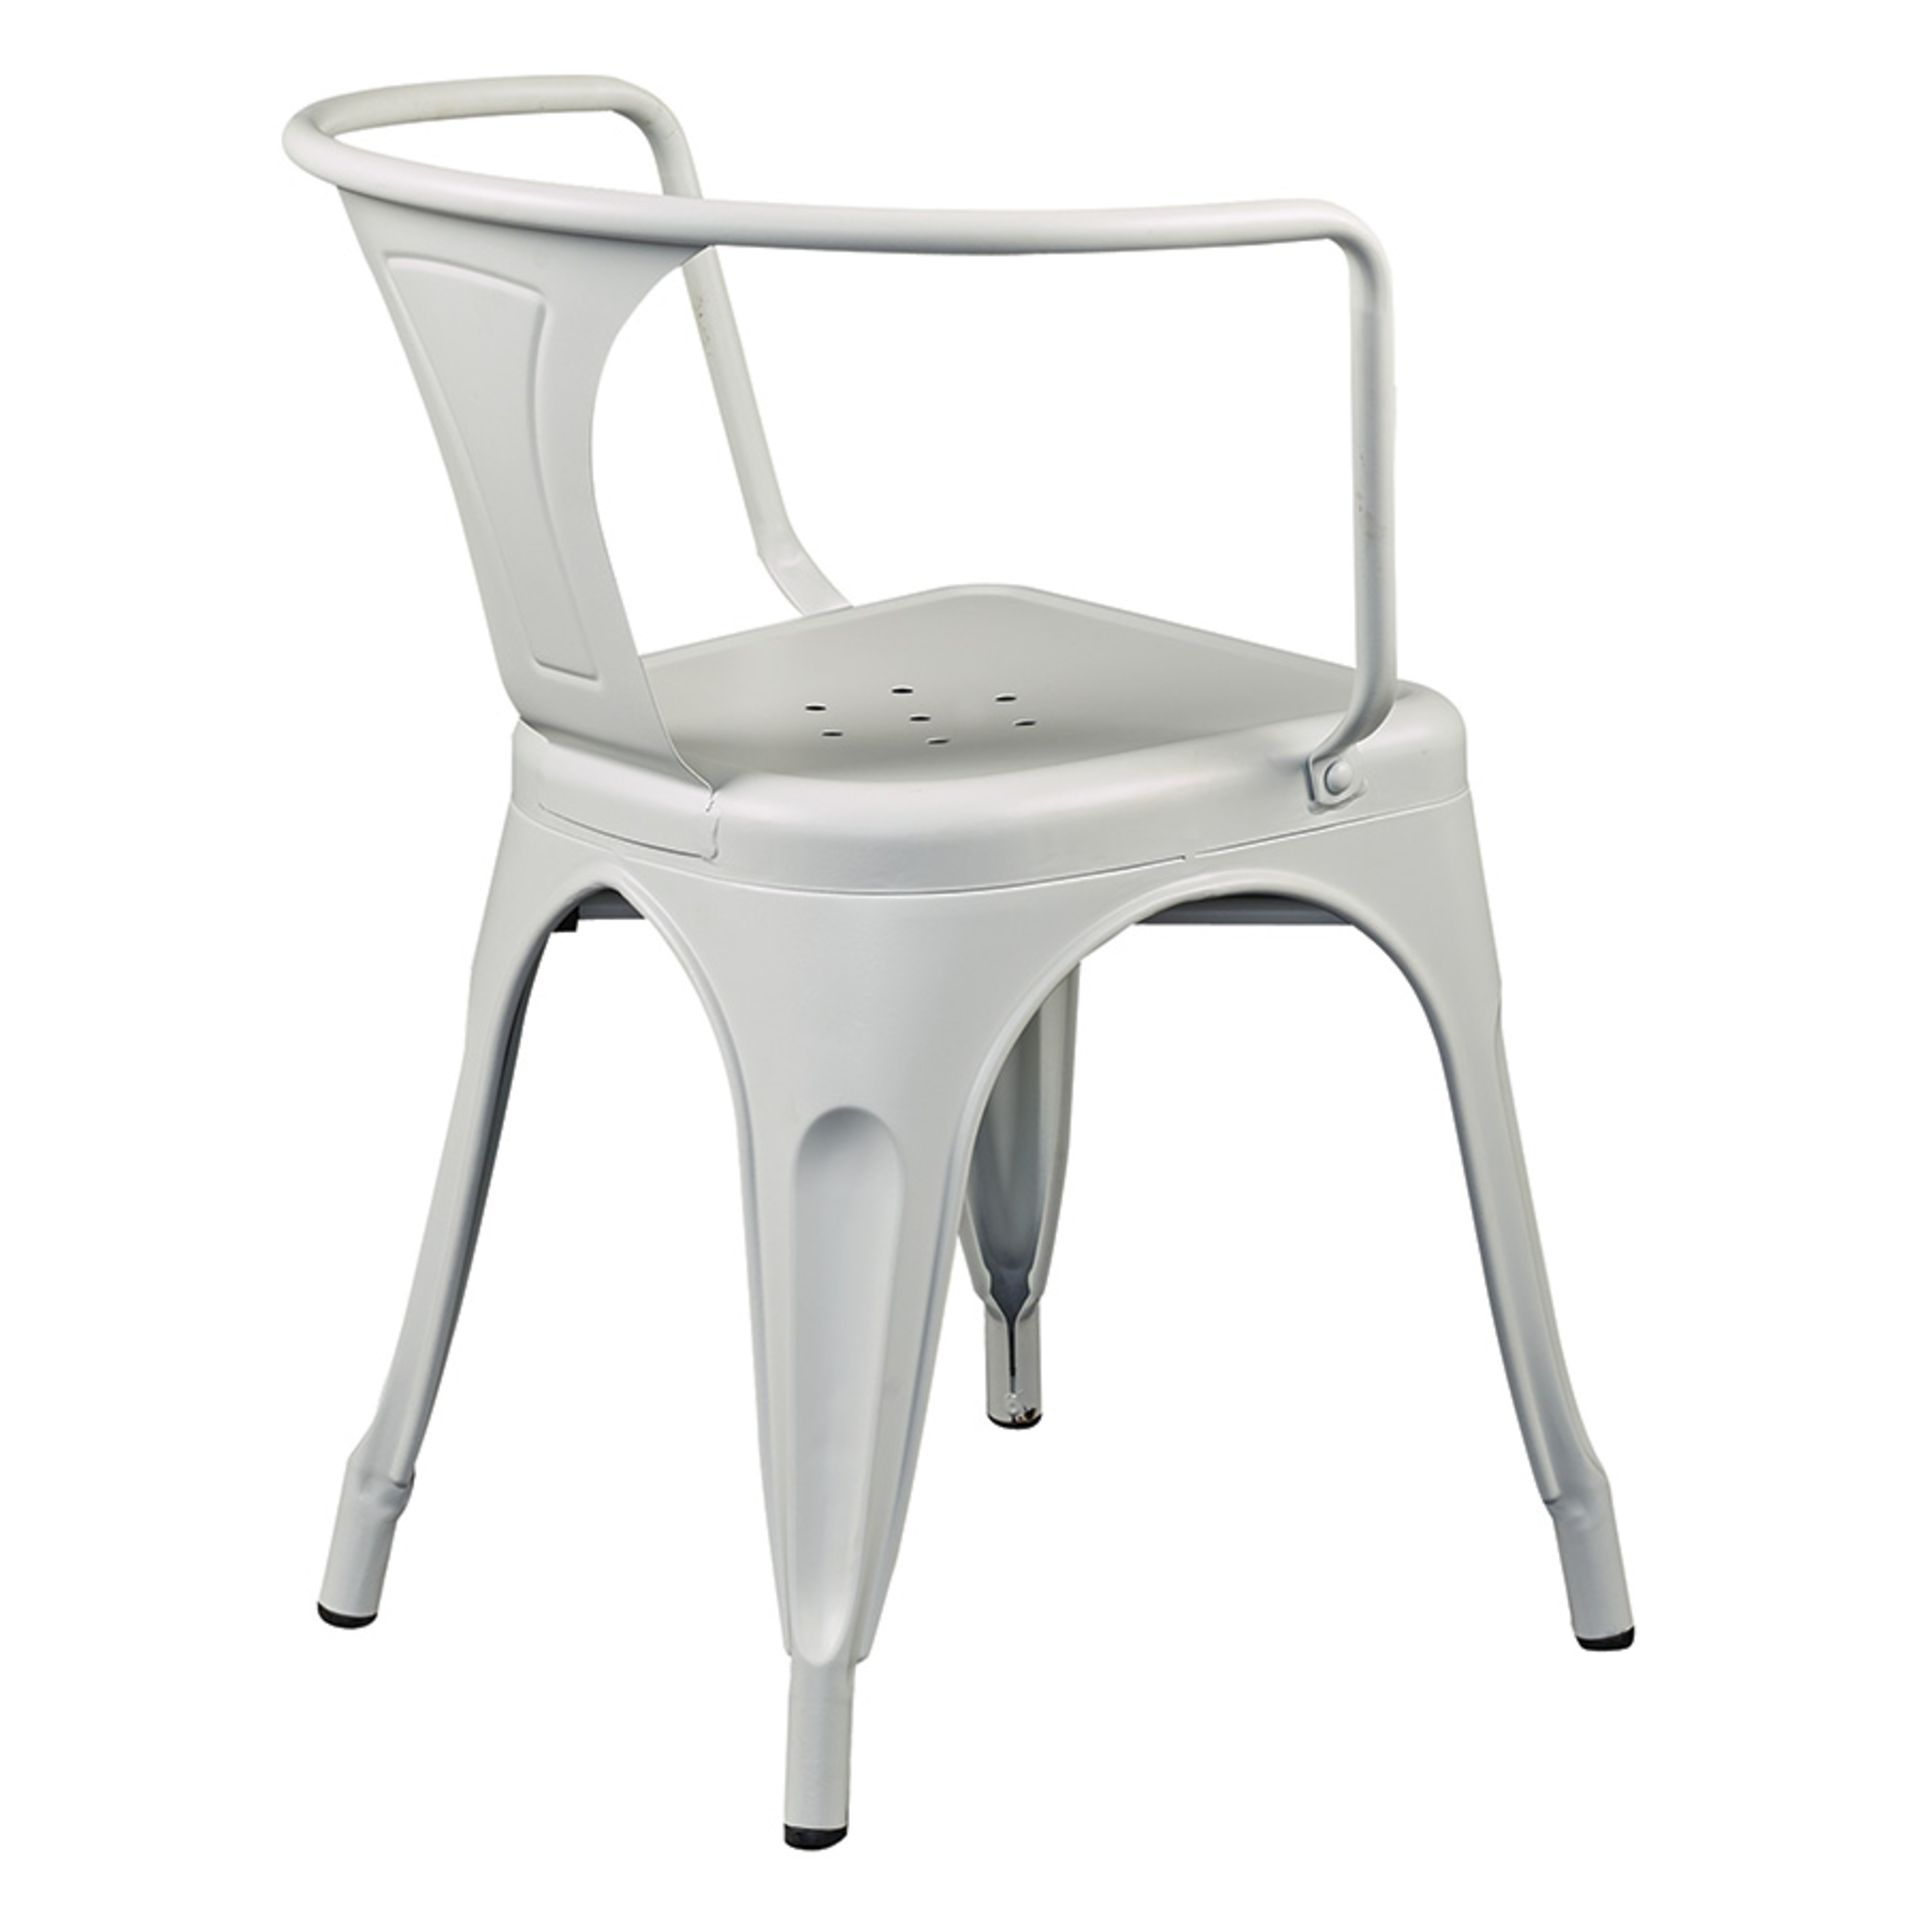 4 x Industrial Tolix Style Stackable Chairs With Armrests - Finish: WHITE - Ideal For Bistros, Pub - Image 3 of 4